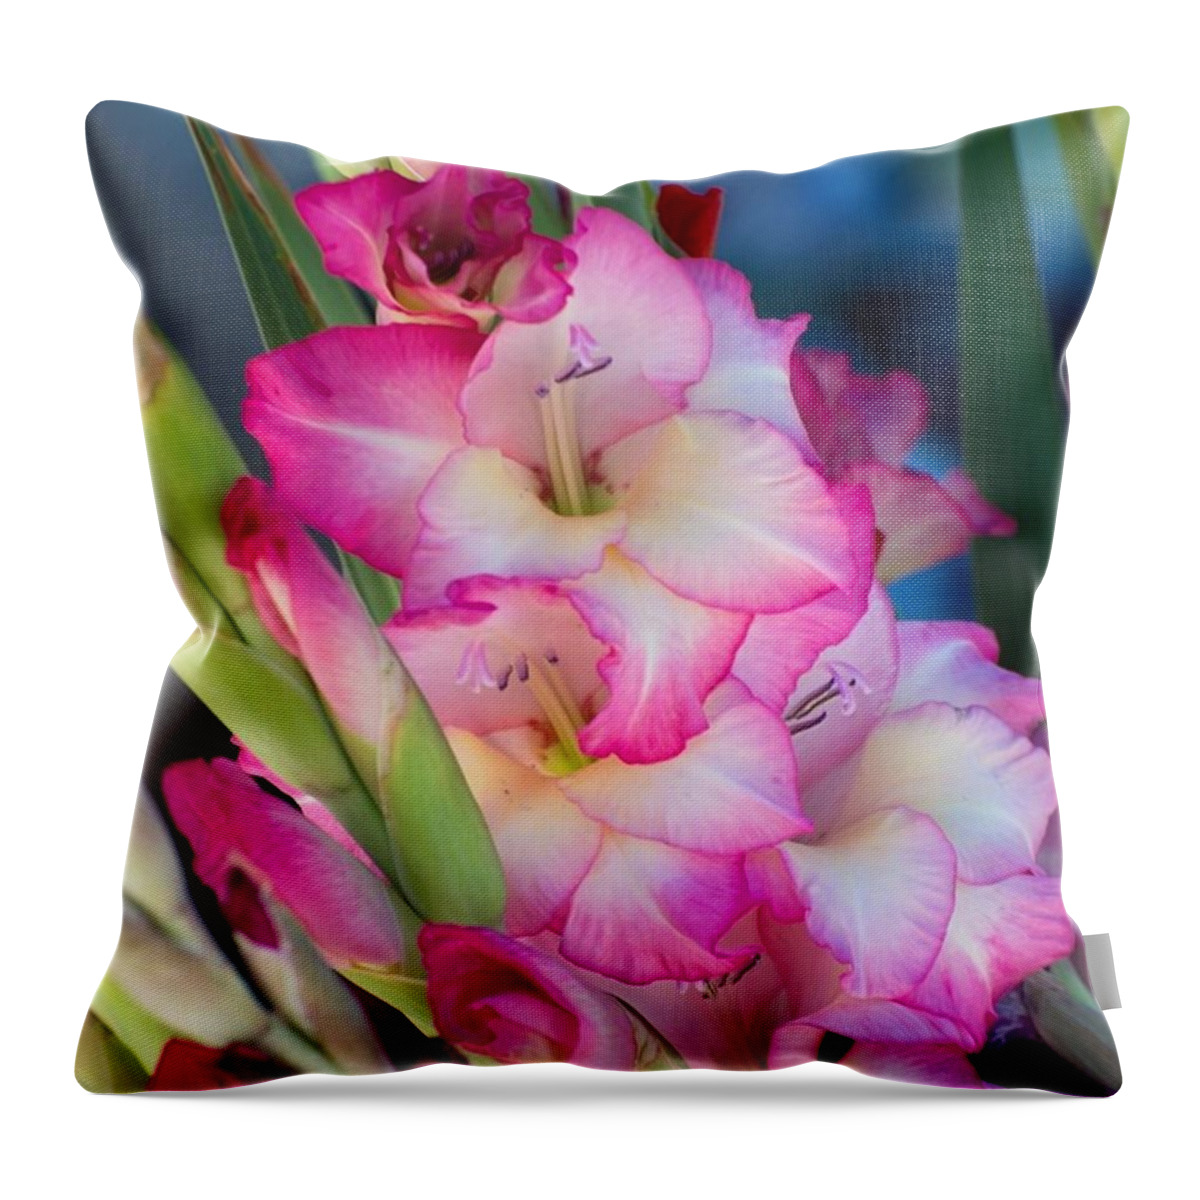 Pink Throw Pillow featuring the photograph Pink And White Flowers by Michael Moriarty